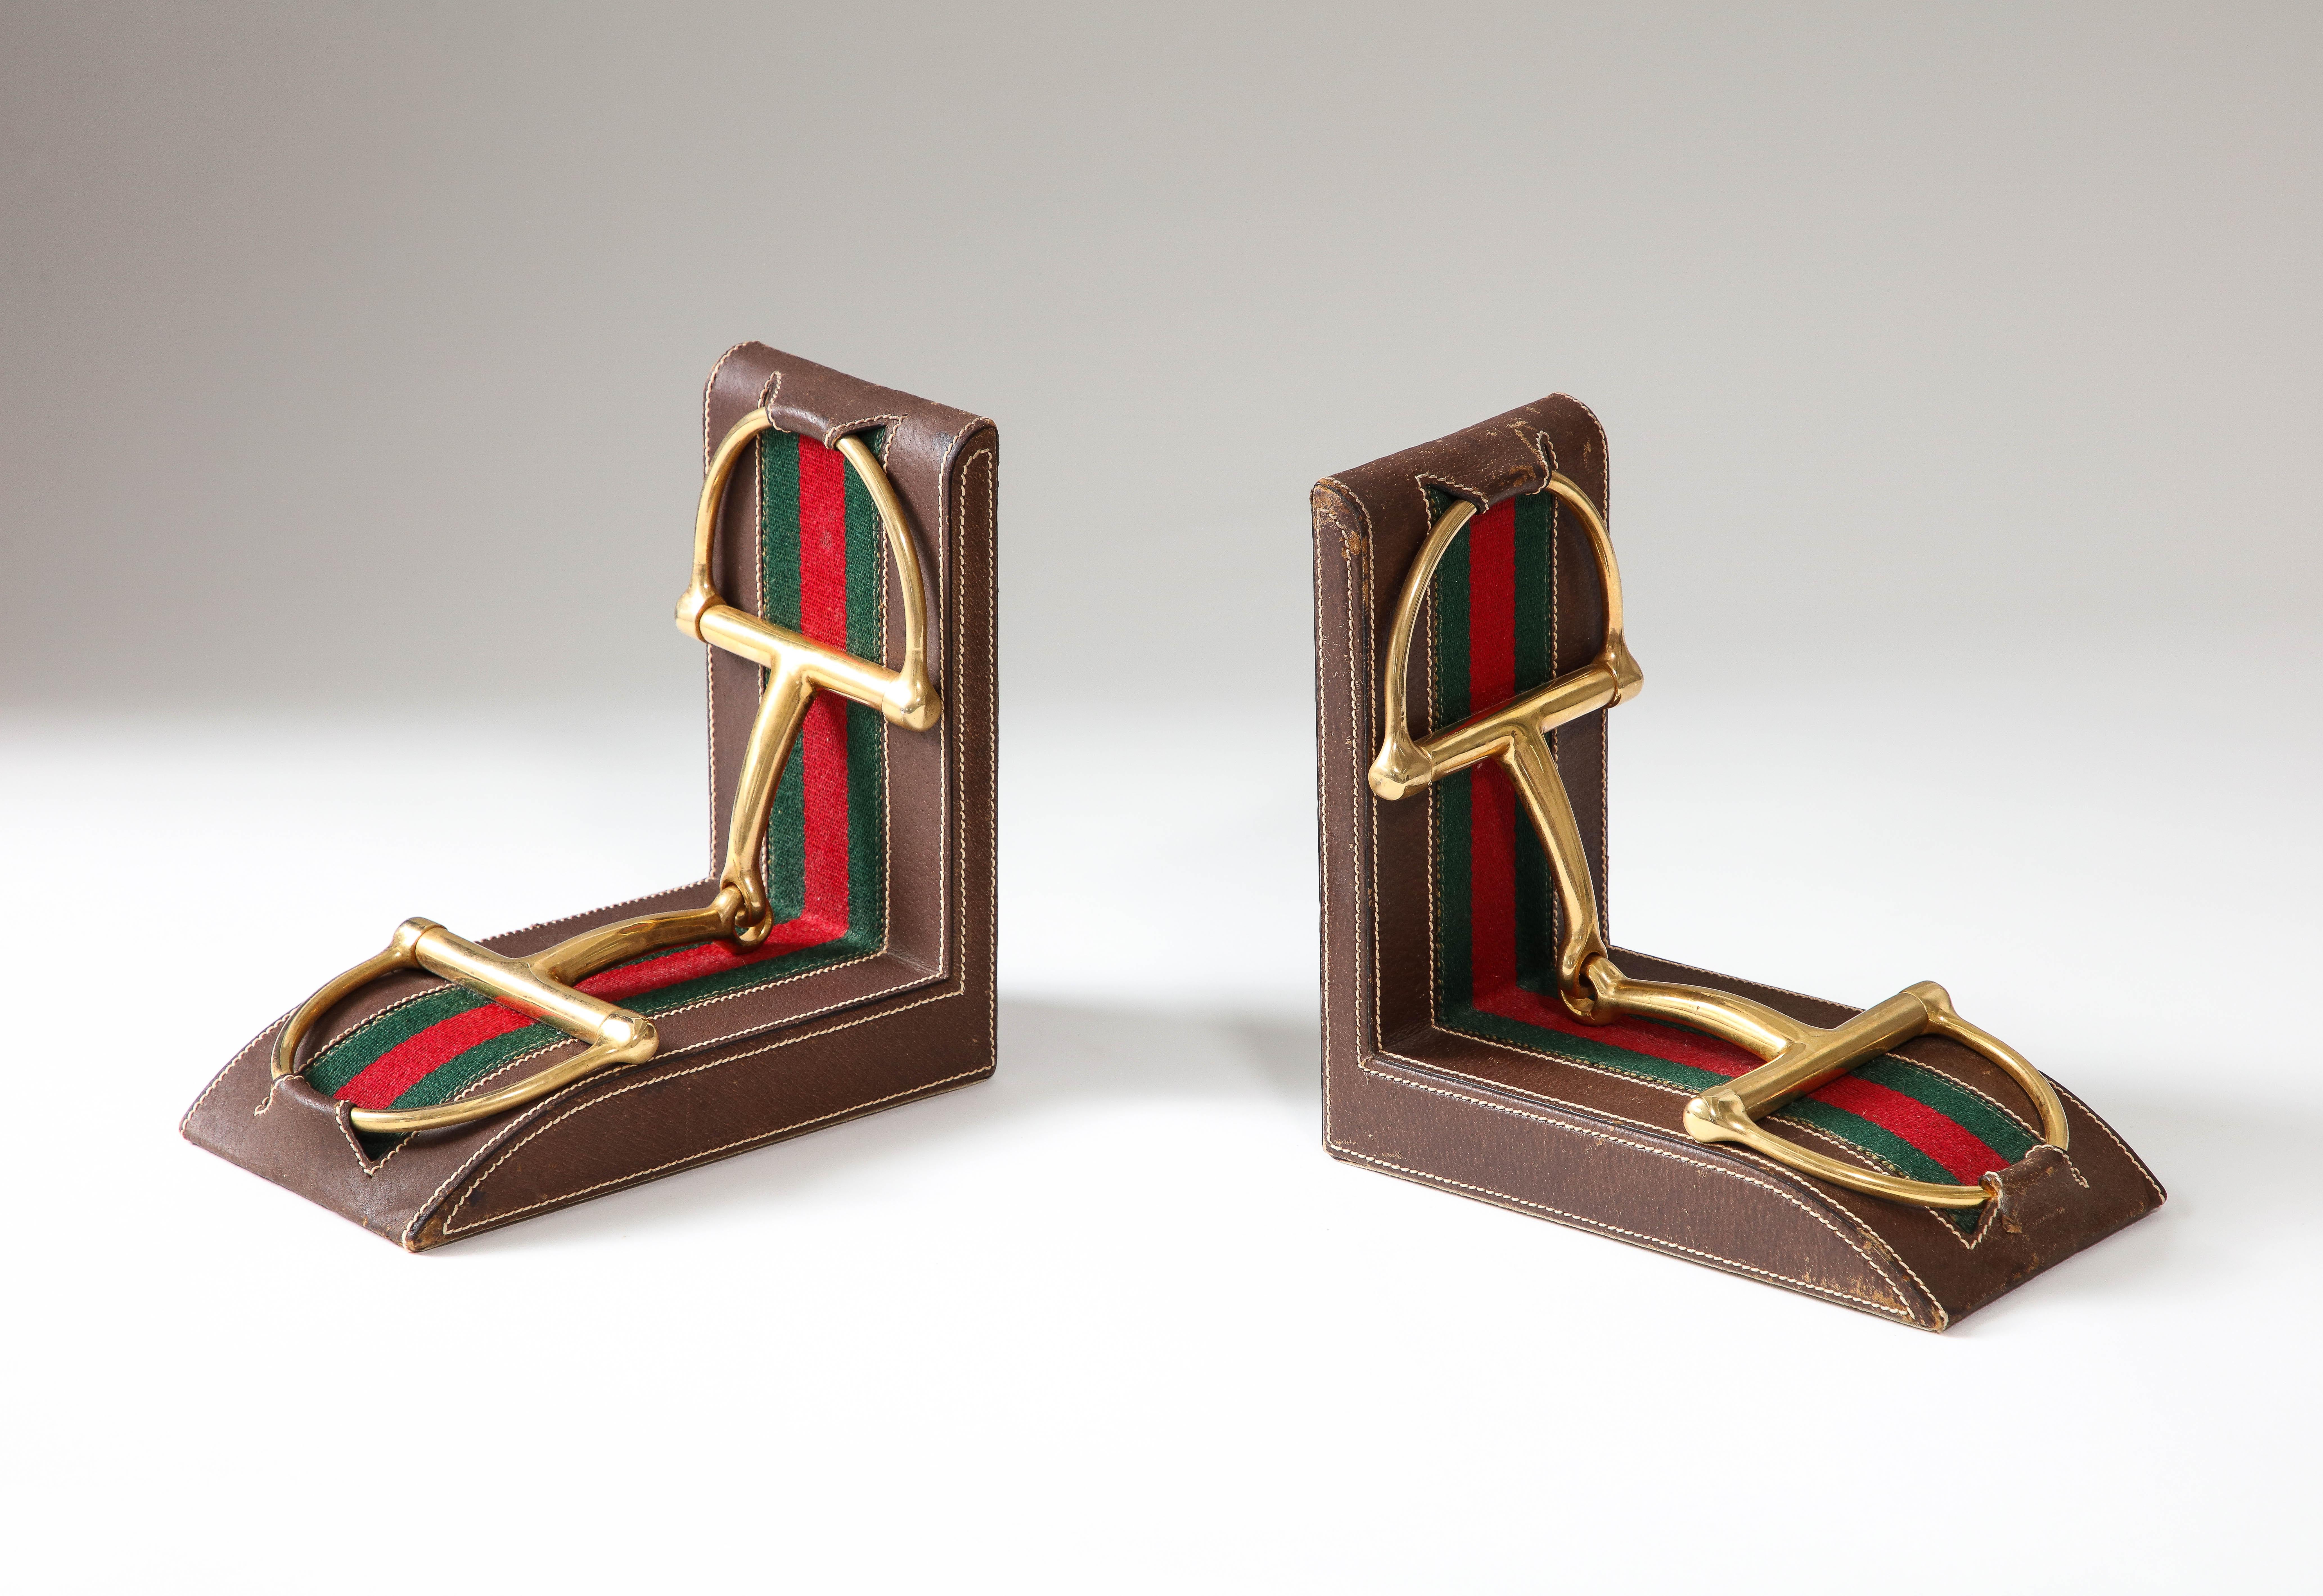 Pair of Leather and Brass Bookends, Gucci, Italy, c. 1970 For Sale 1